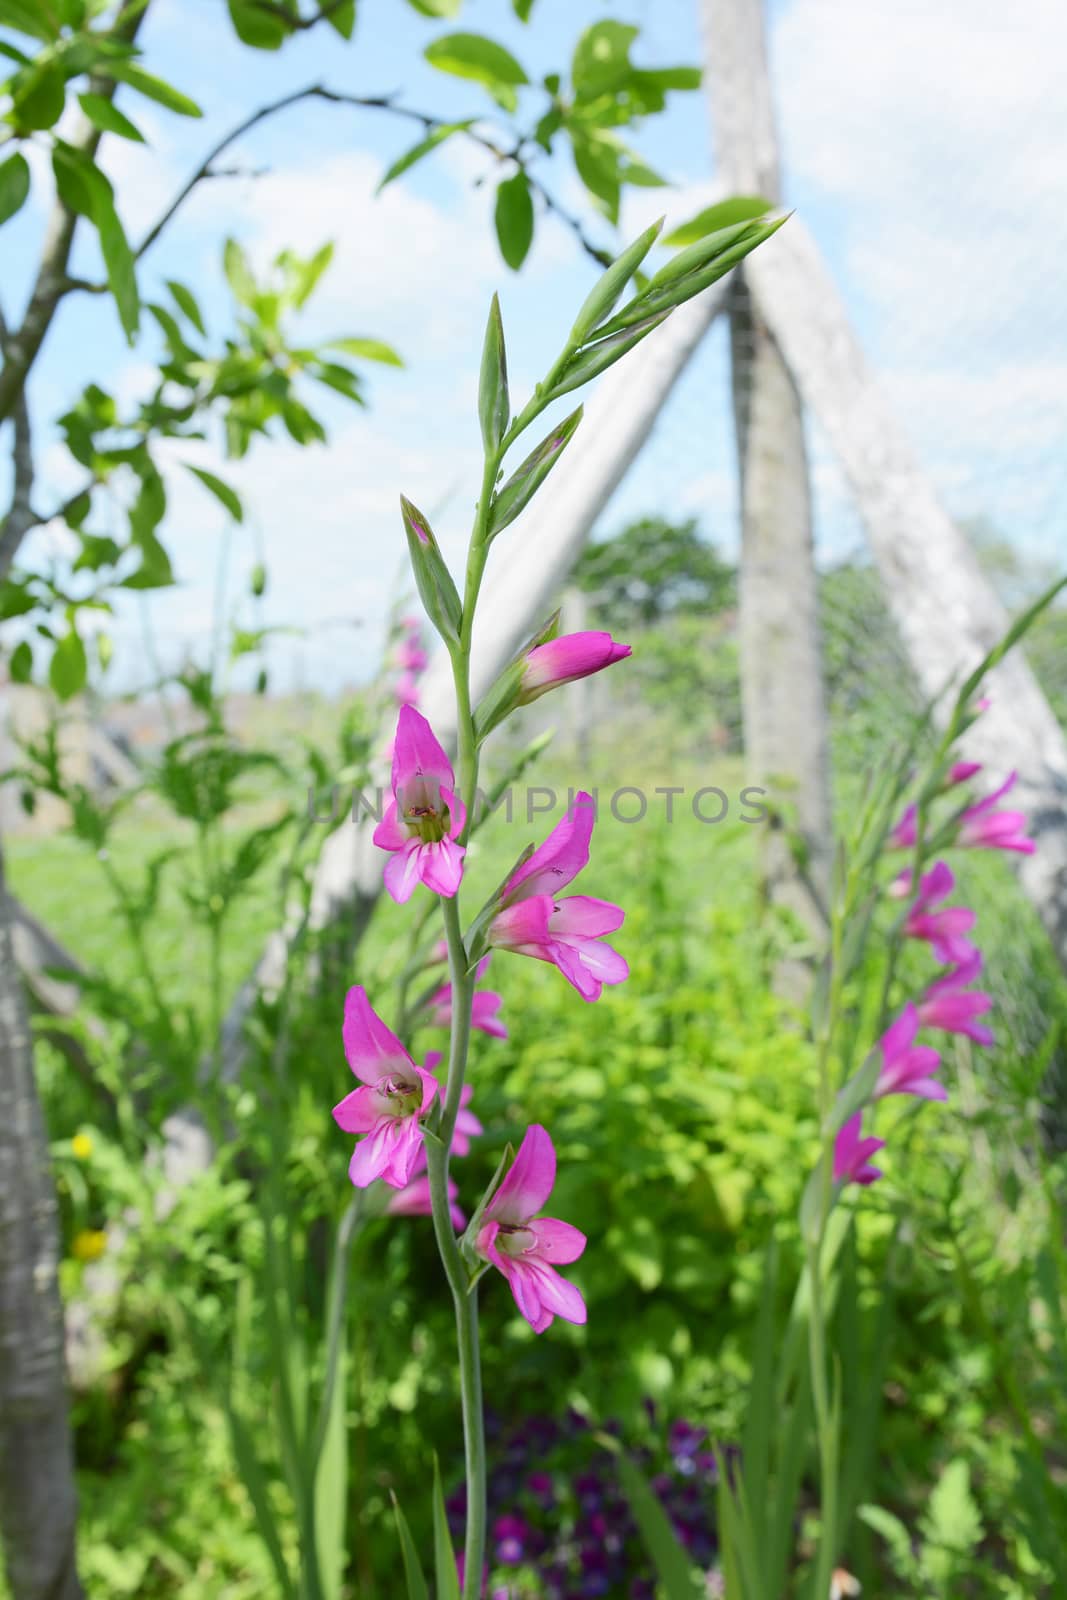 Stalks of pink gladioli flowers growing in a verdant flower bed with blue sky beyond